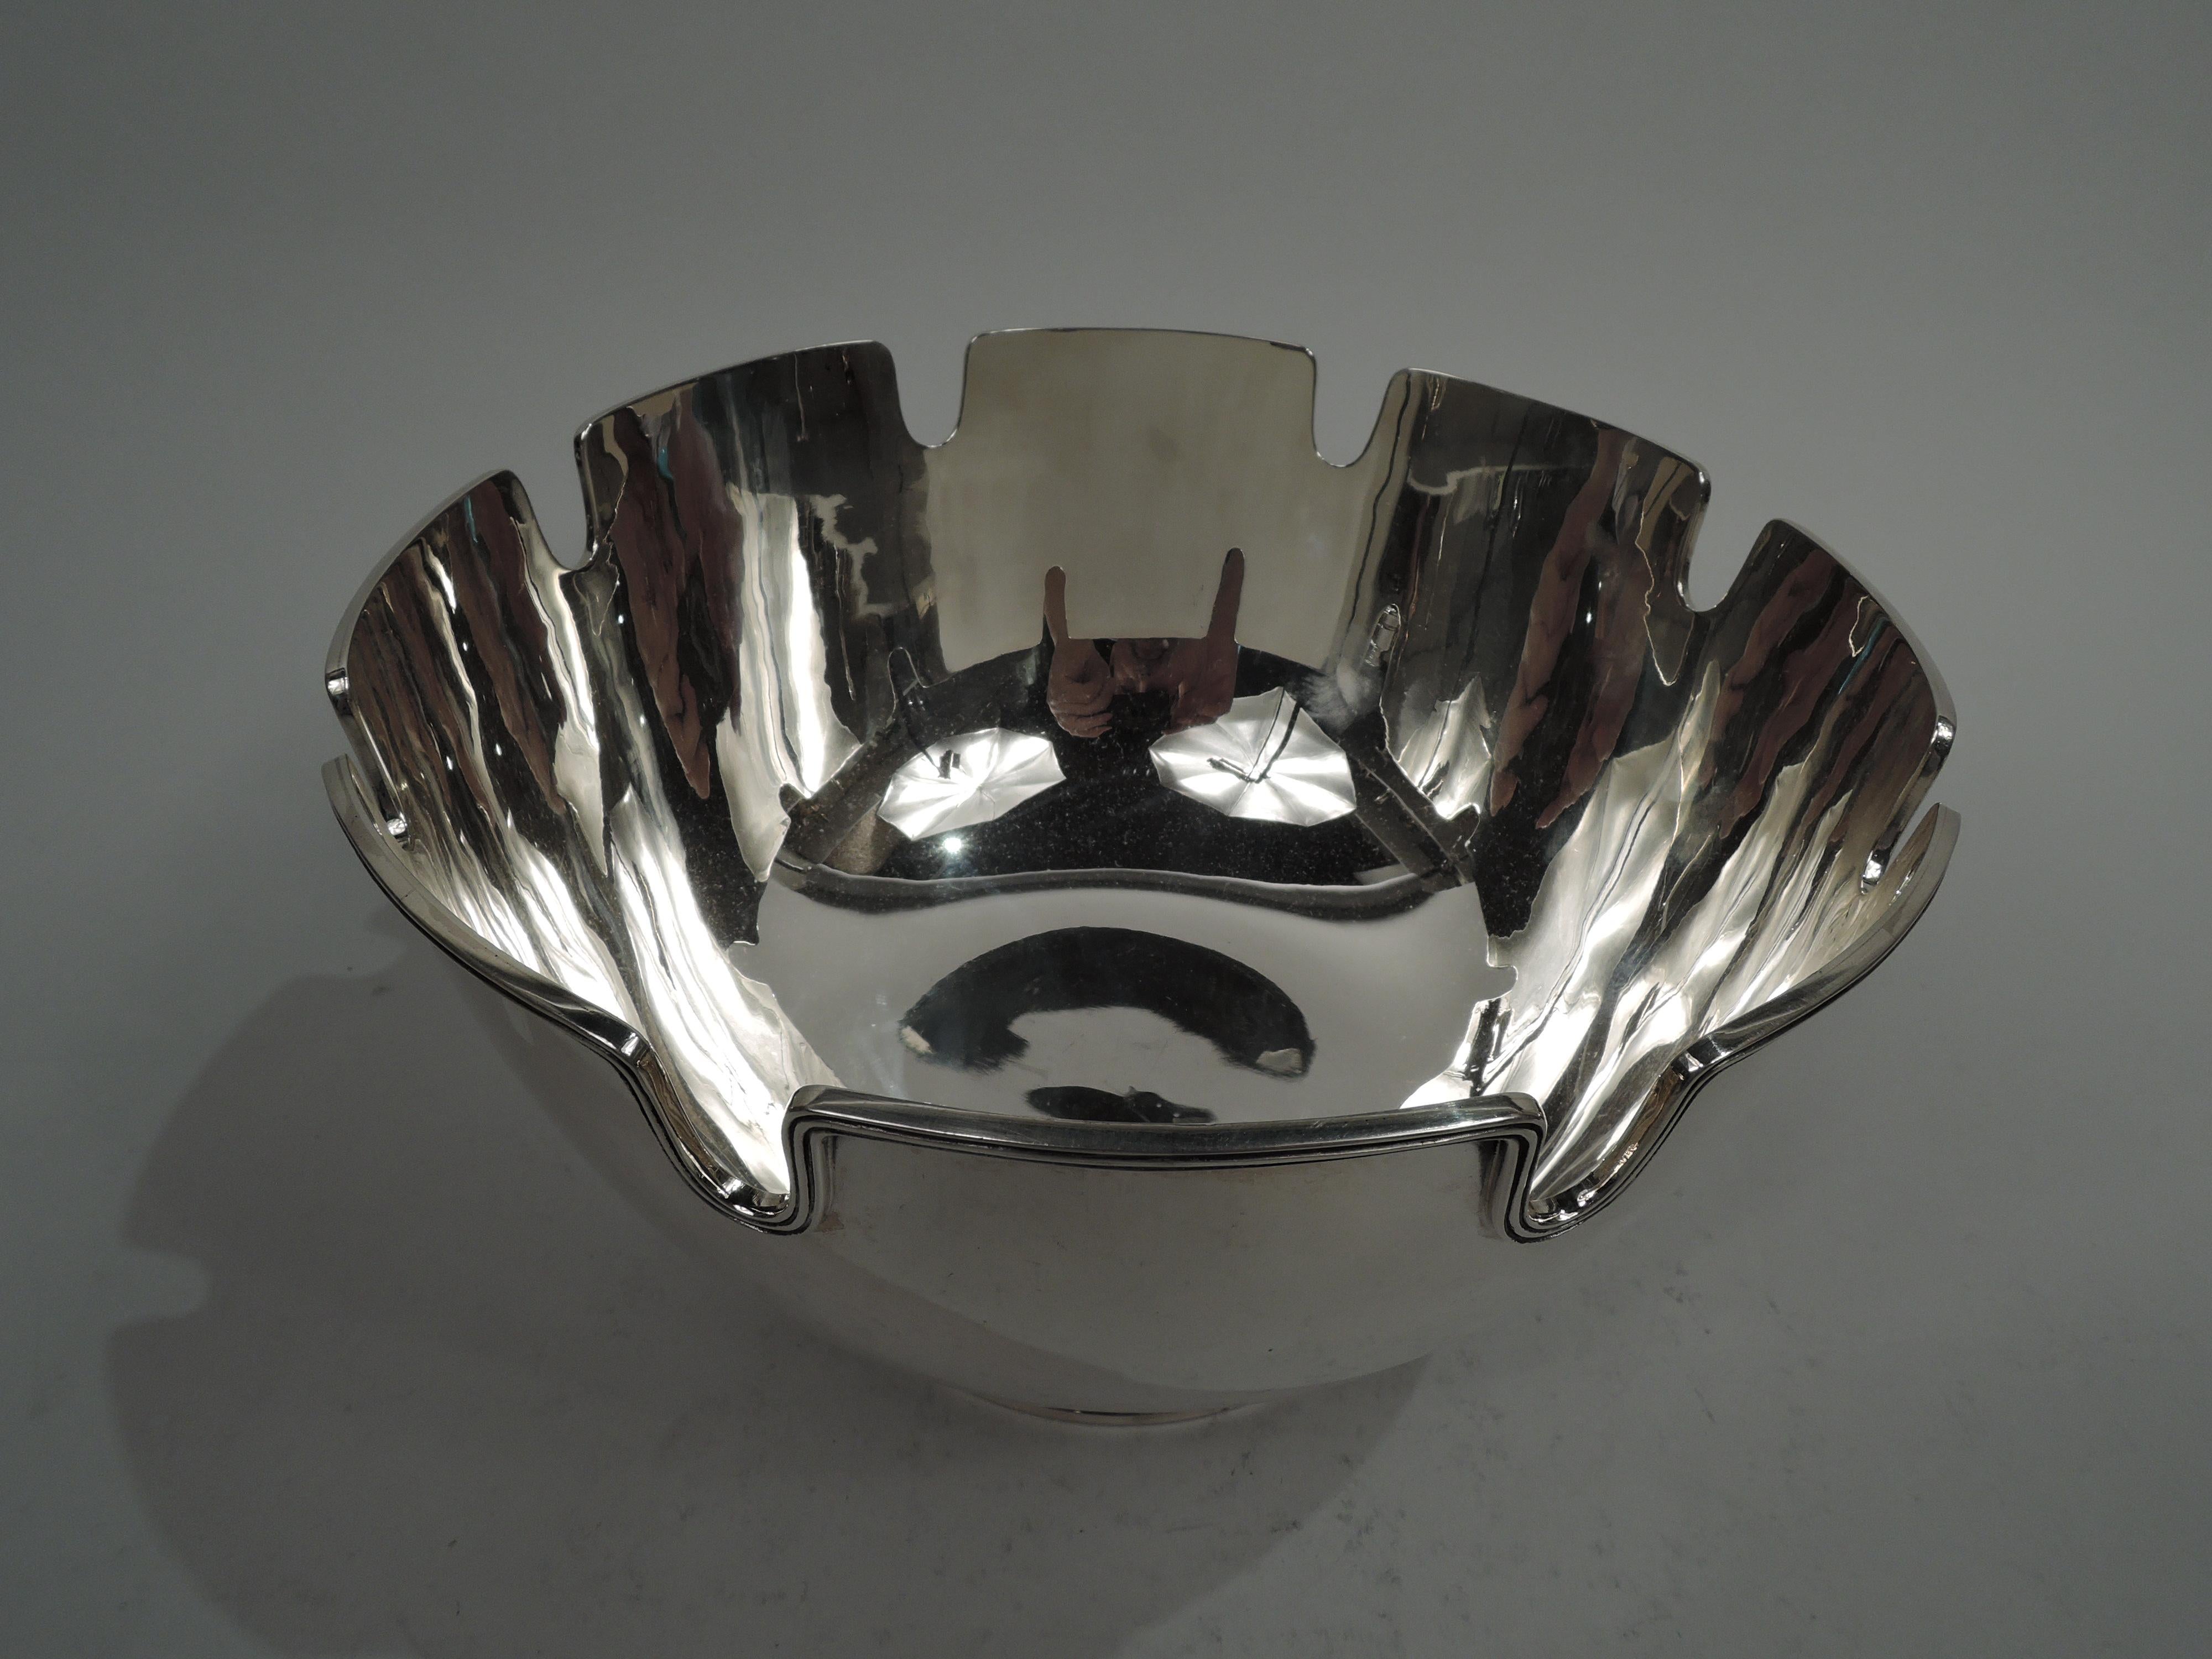 Mid-Century Modern sterling silver monteith bowl. Made by Tiffany & Co. in New York. Curved sides and reeded curvilinear rim; raised and spread foot. Stylish for serving and presentation. Plenty of room for engraving. Fully marked including maker’s